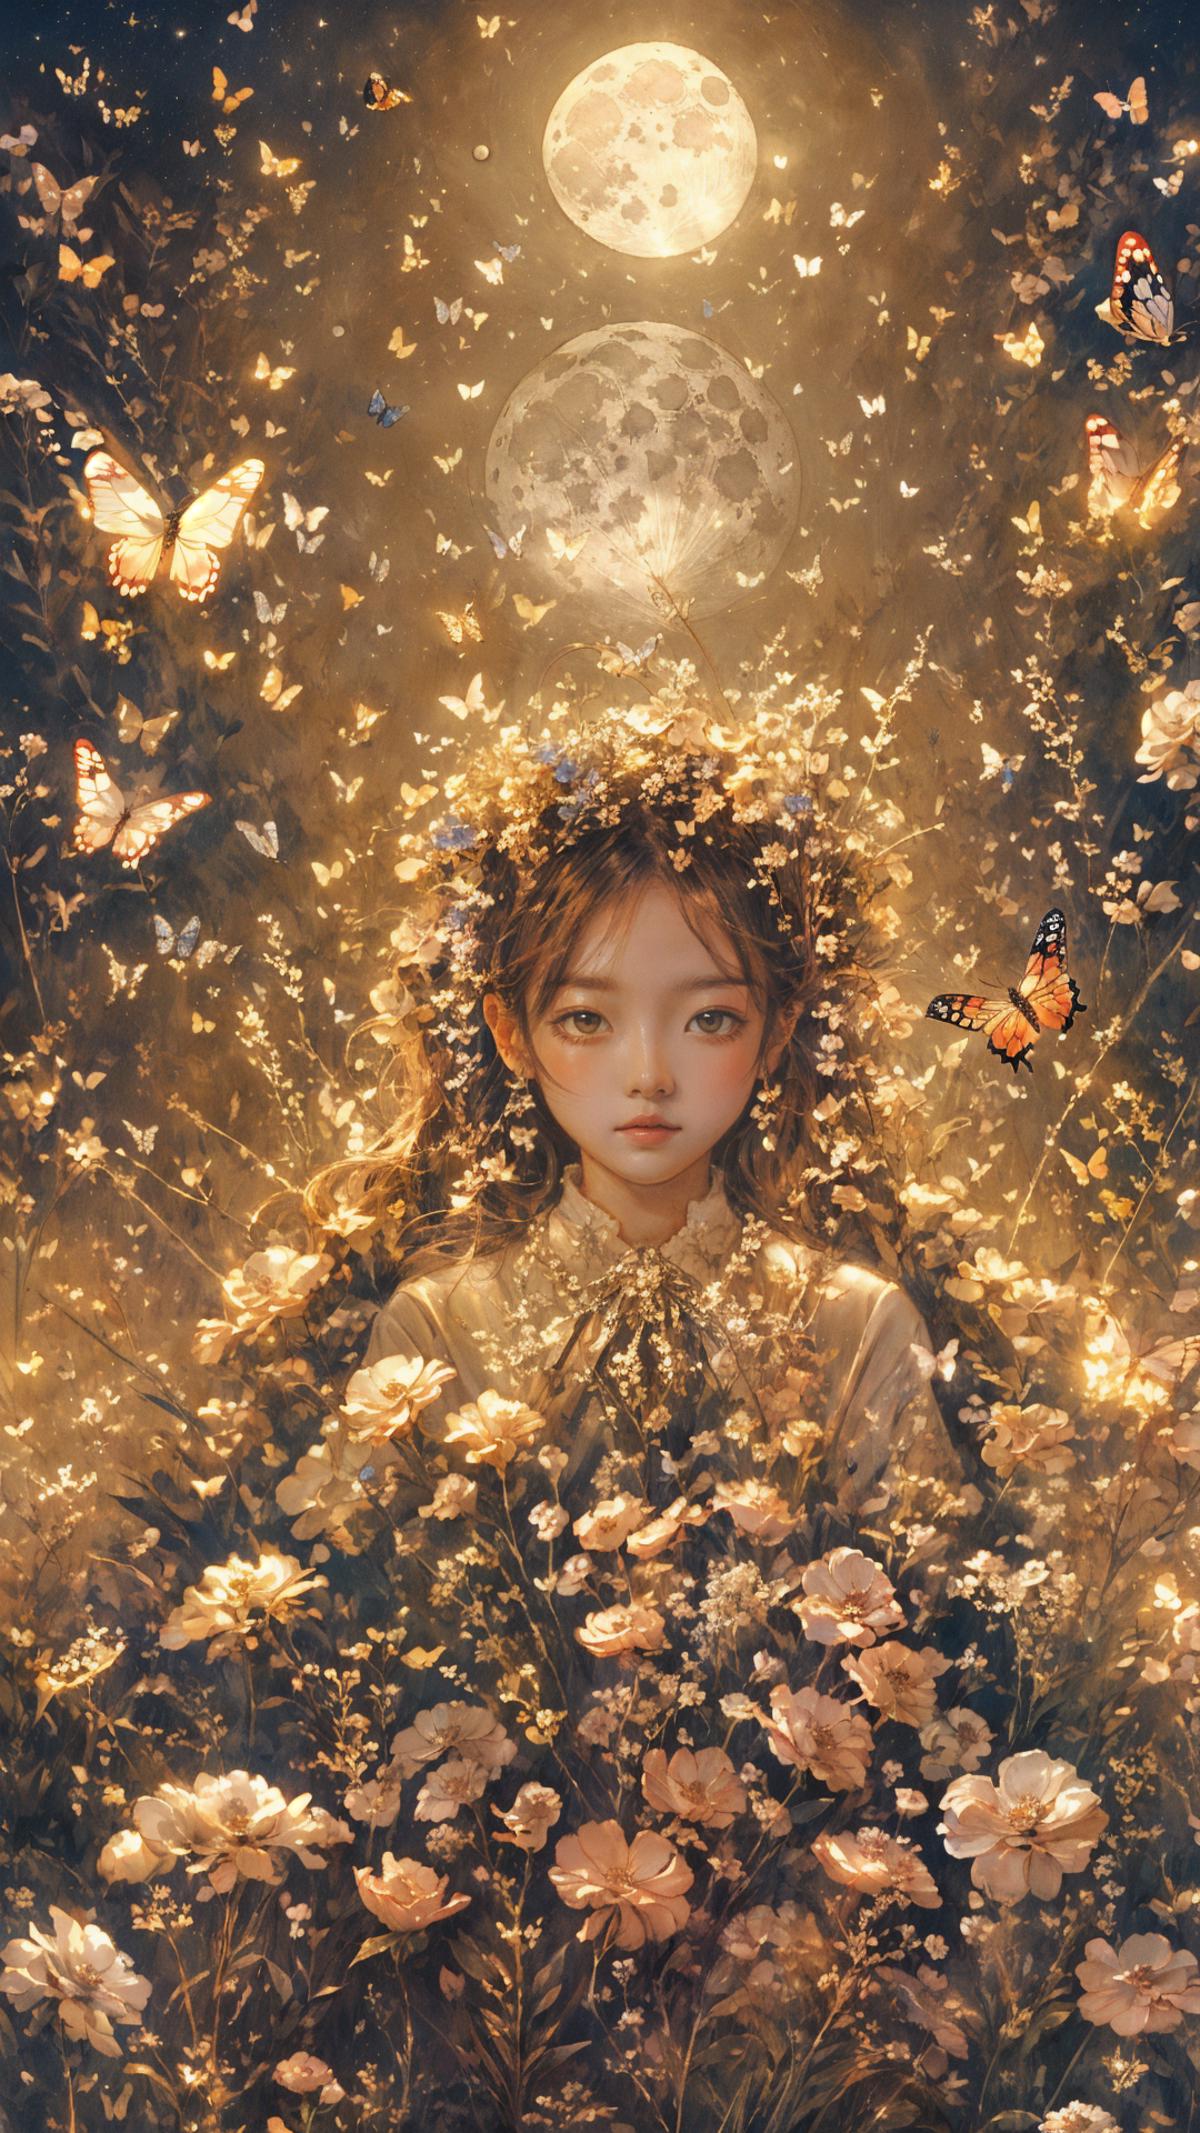 A painting of a girl with flowers and butterflies around her head.